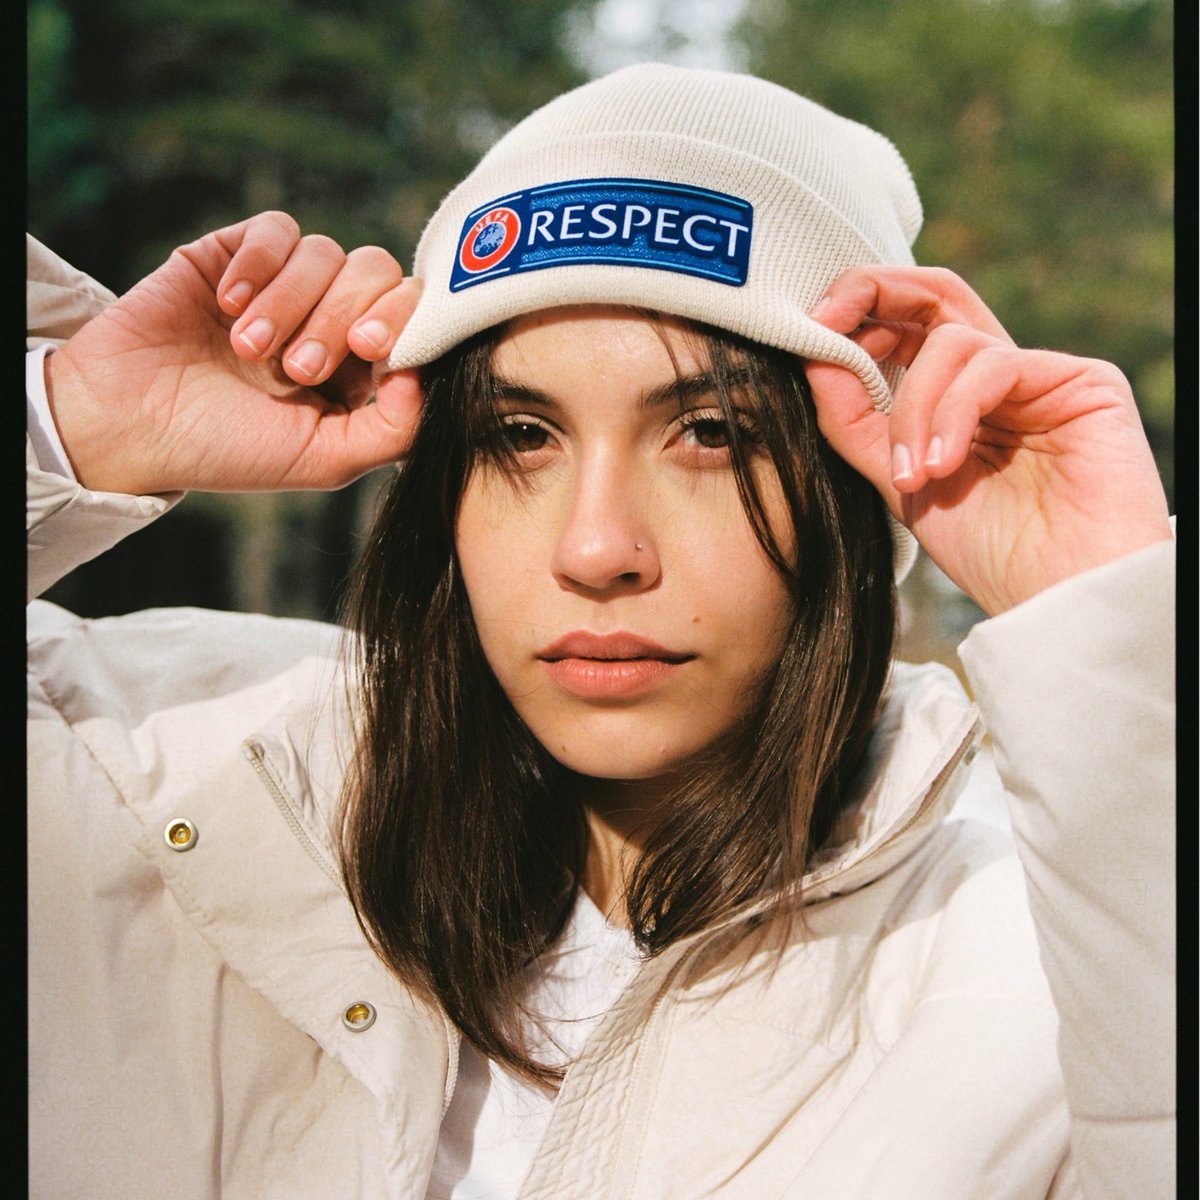 Image of Respect beanie